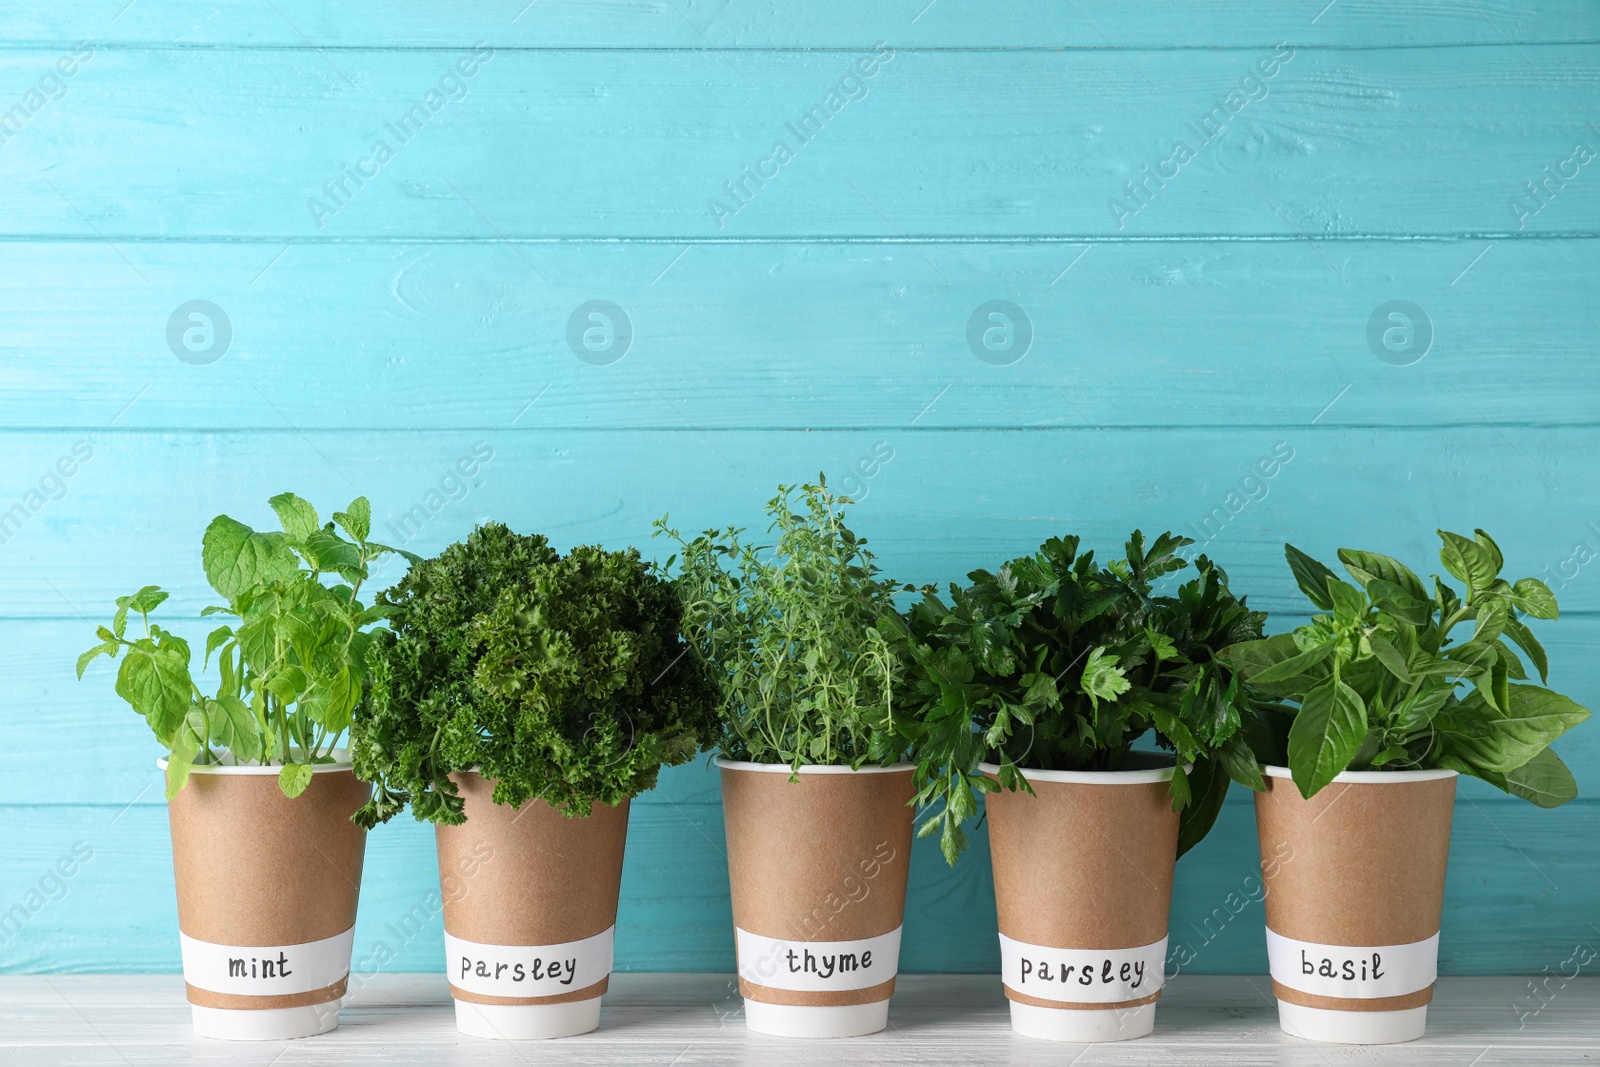 Photo of Seedlings of different aromatic herbs in paper cups with name labels on white wooden table